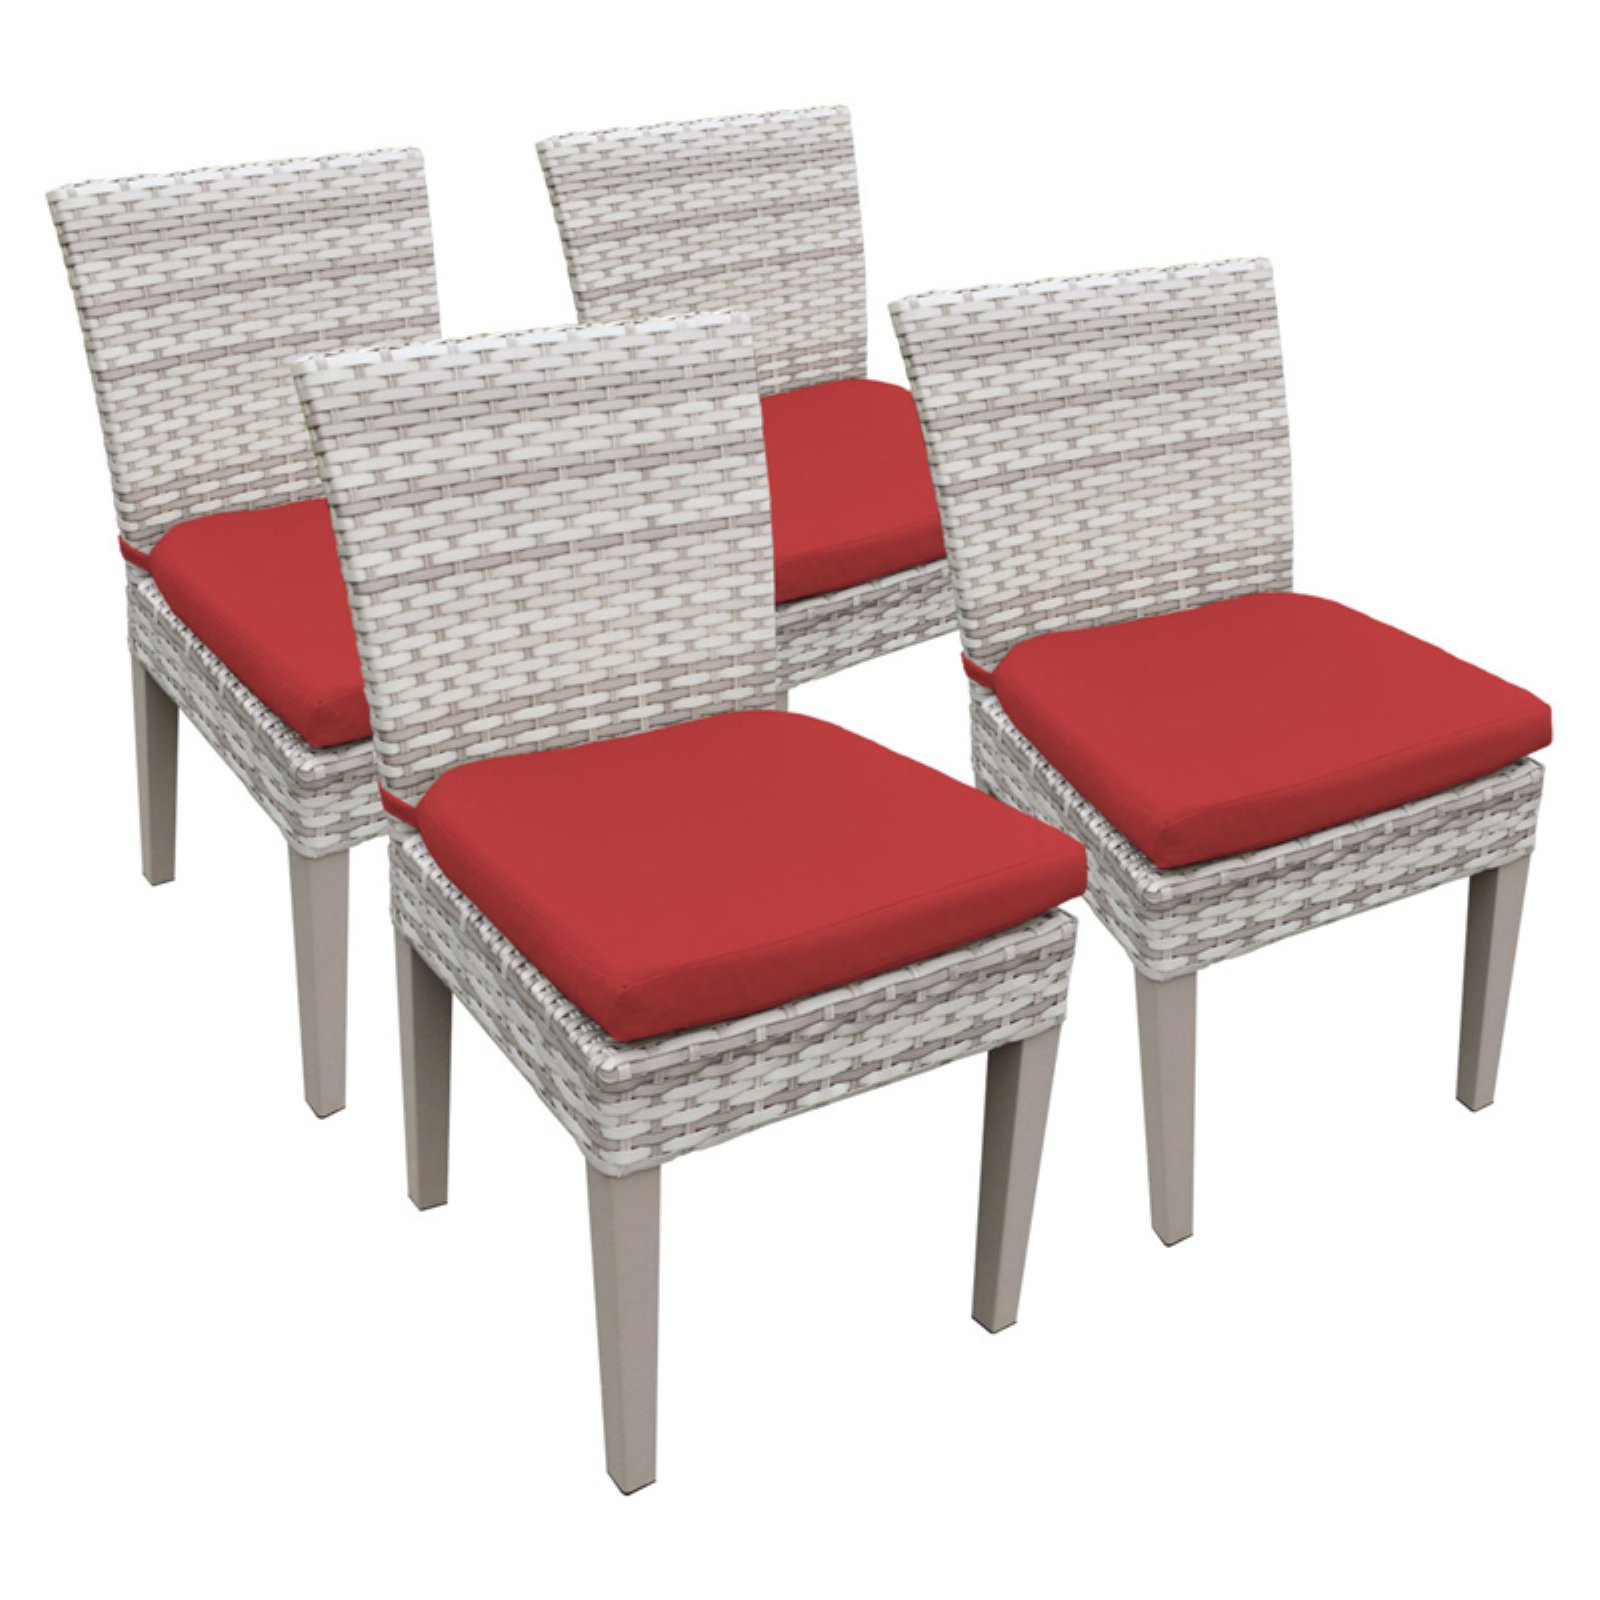 8 fairmont armless dining chairs-color:cilantro - image 2 of 2